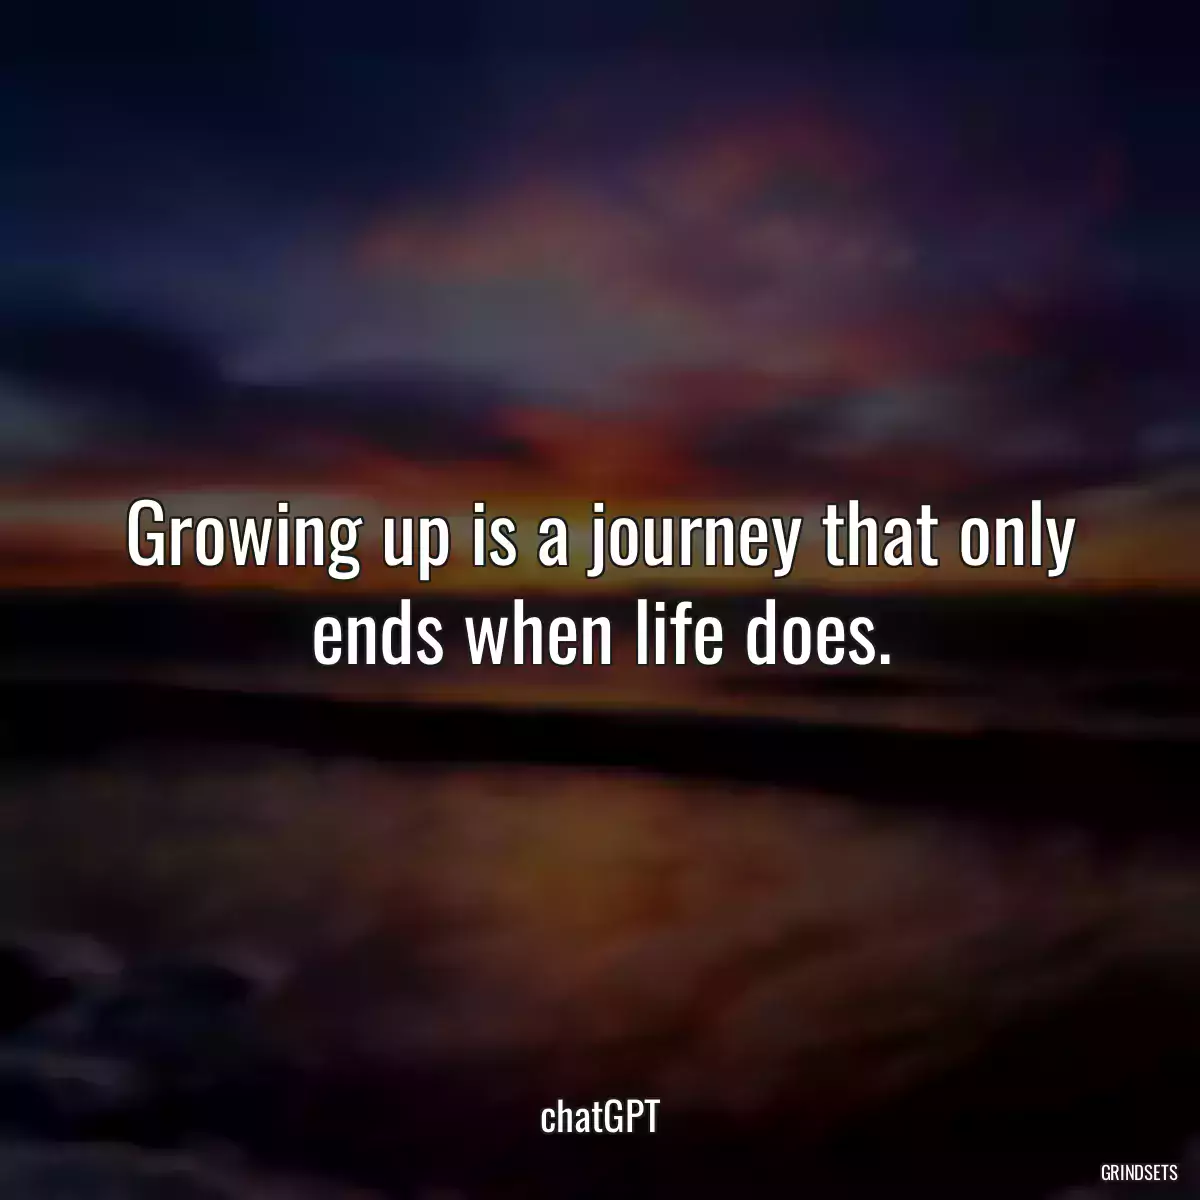 Growing up is a journey that only ends when life does.